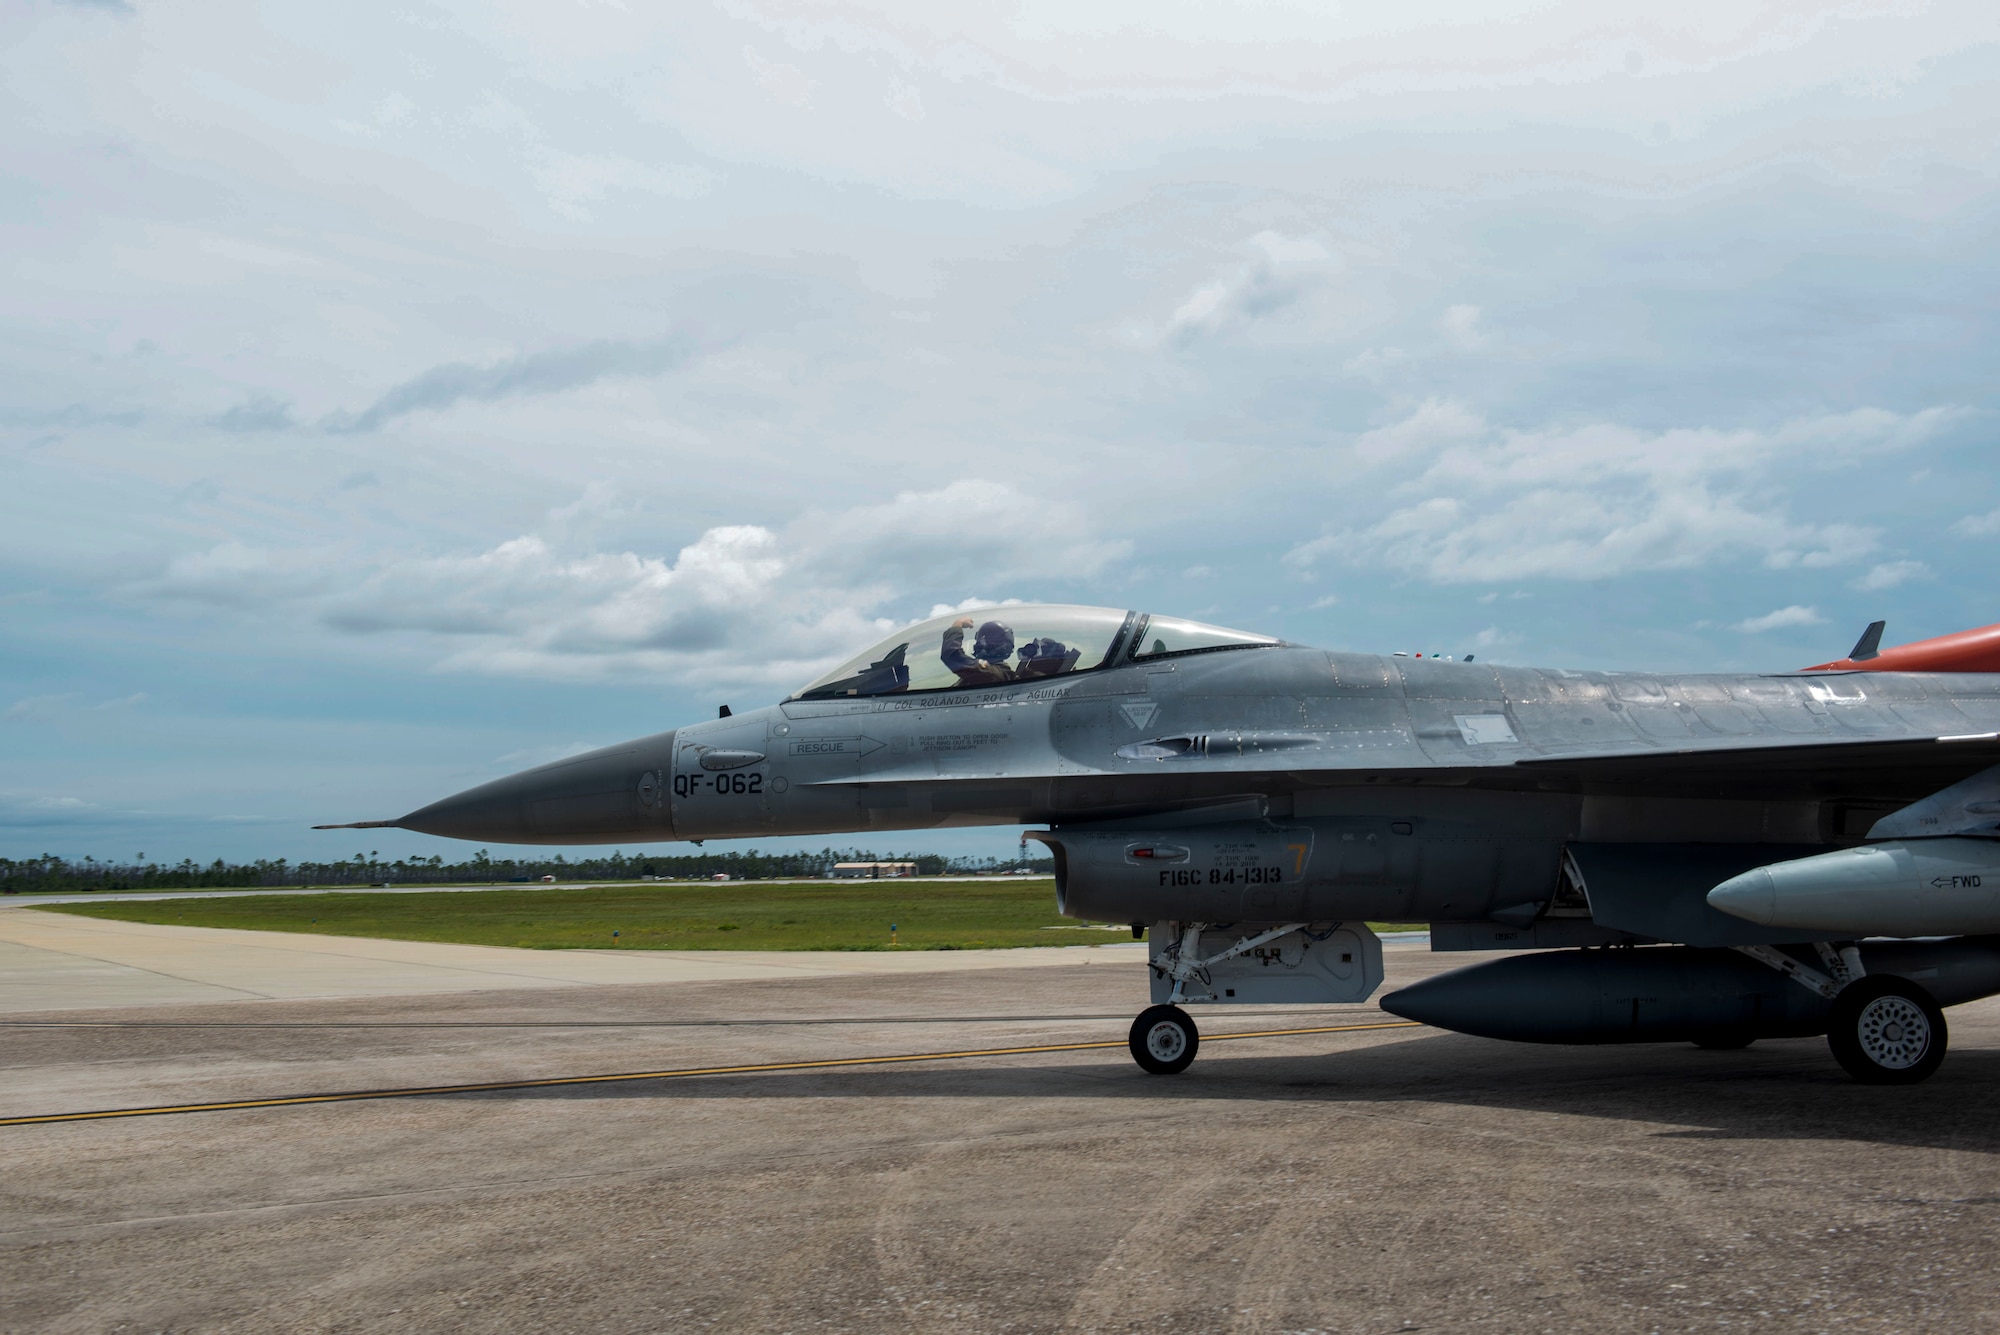 U.S. Air Force Lt. Col. Travis Winslow, 82nd Aerial Targets Squadron, commander, taxies a QF-16 aircraft for takeoff at Tyndall Air Force Base, Florida, Aug. 21, 2020. Wilson piloted the aircraft to Shaw Air Force Base, South Carolina, as part of an airfield evacuation in preparation for severe weather conditions approaching the Gulf of Mexico. (U.S. Air Force photo by Staff Sgt. Magen M. Reeves)